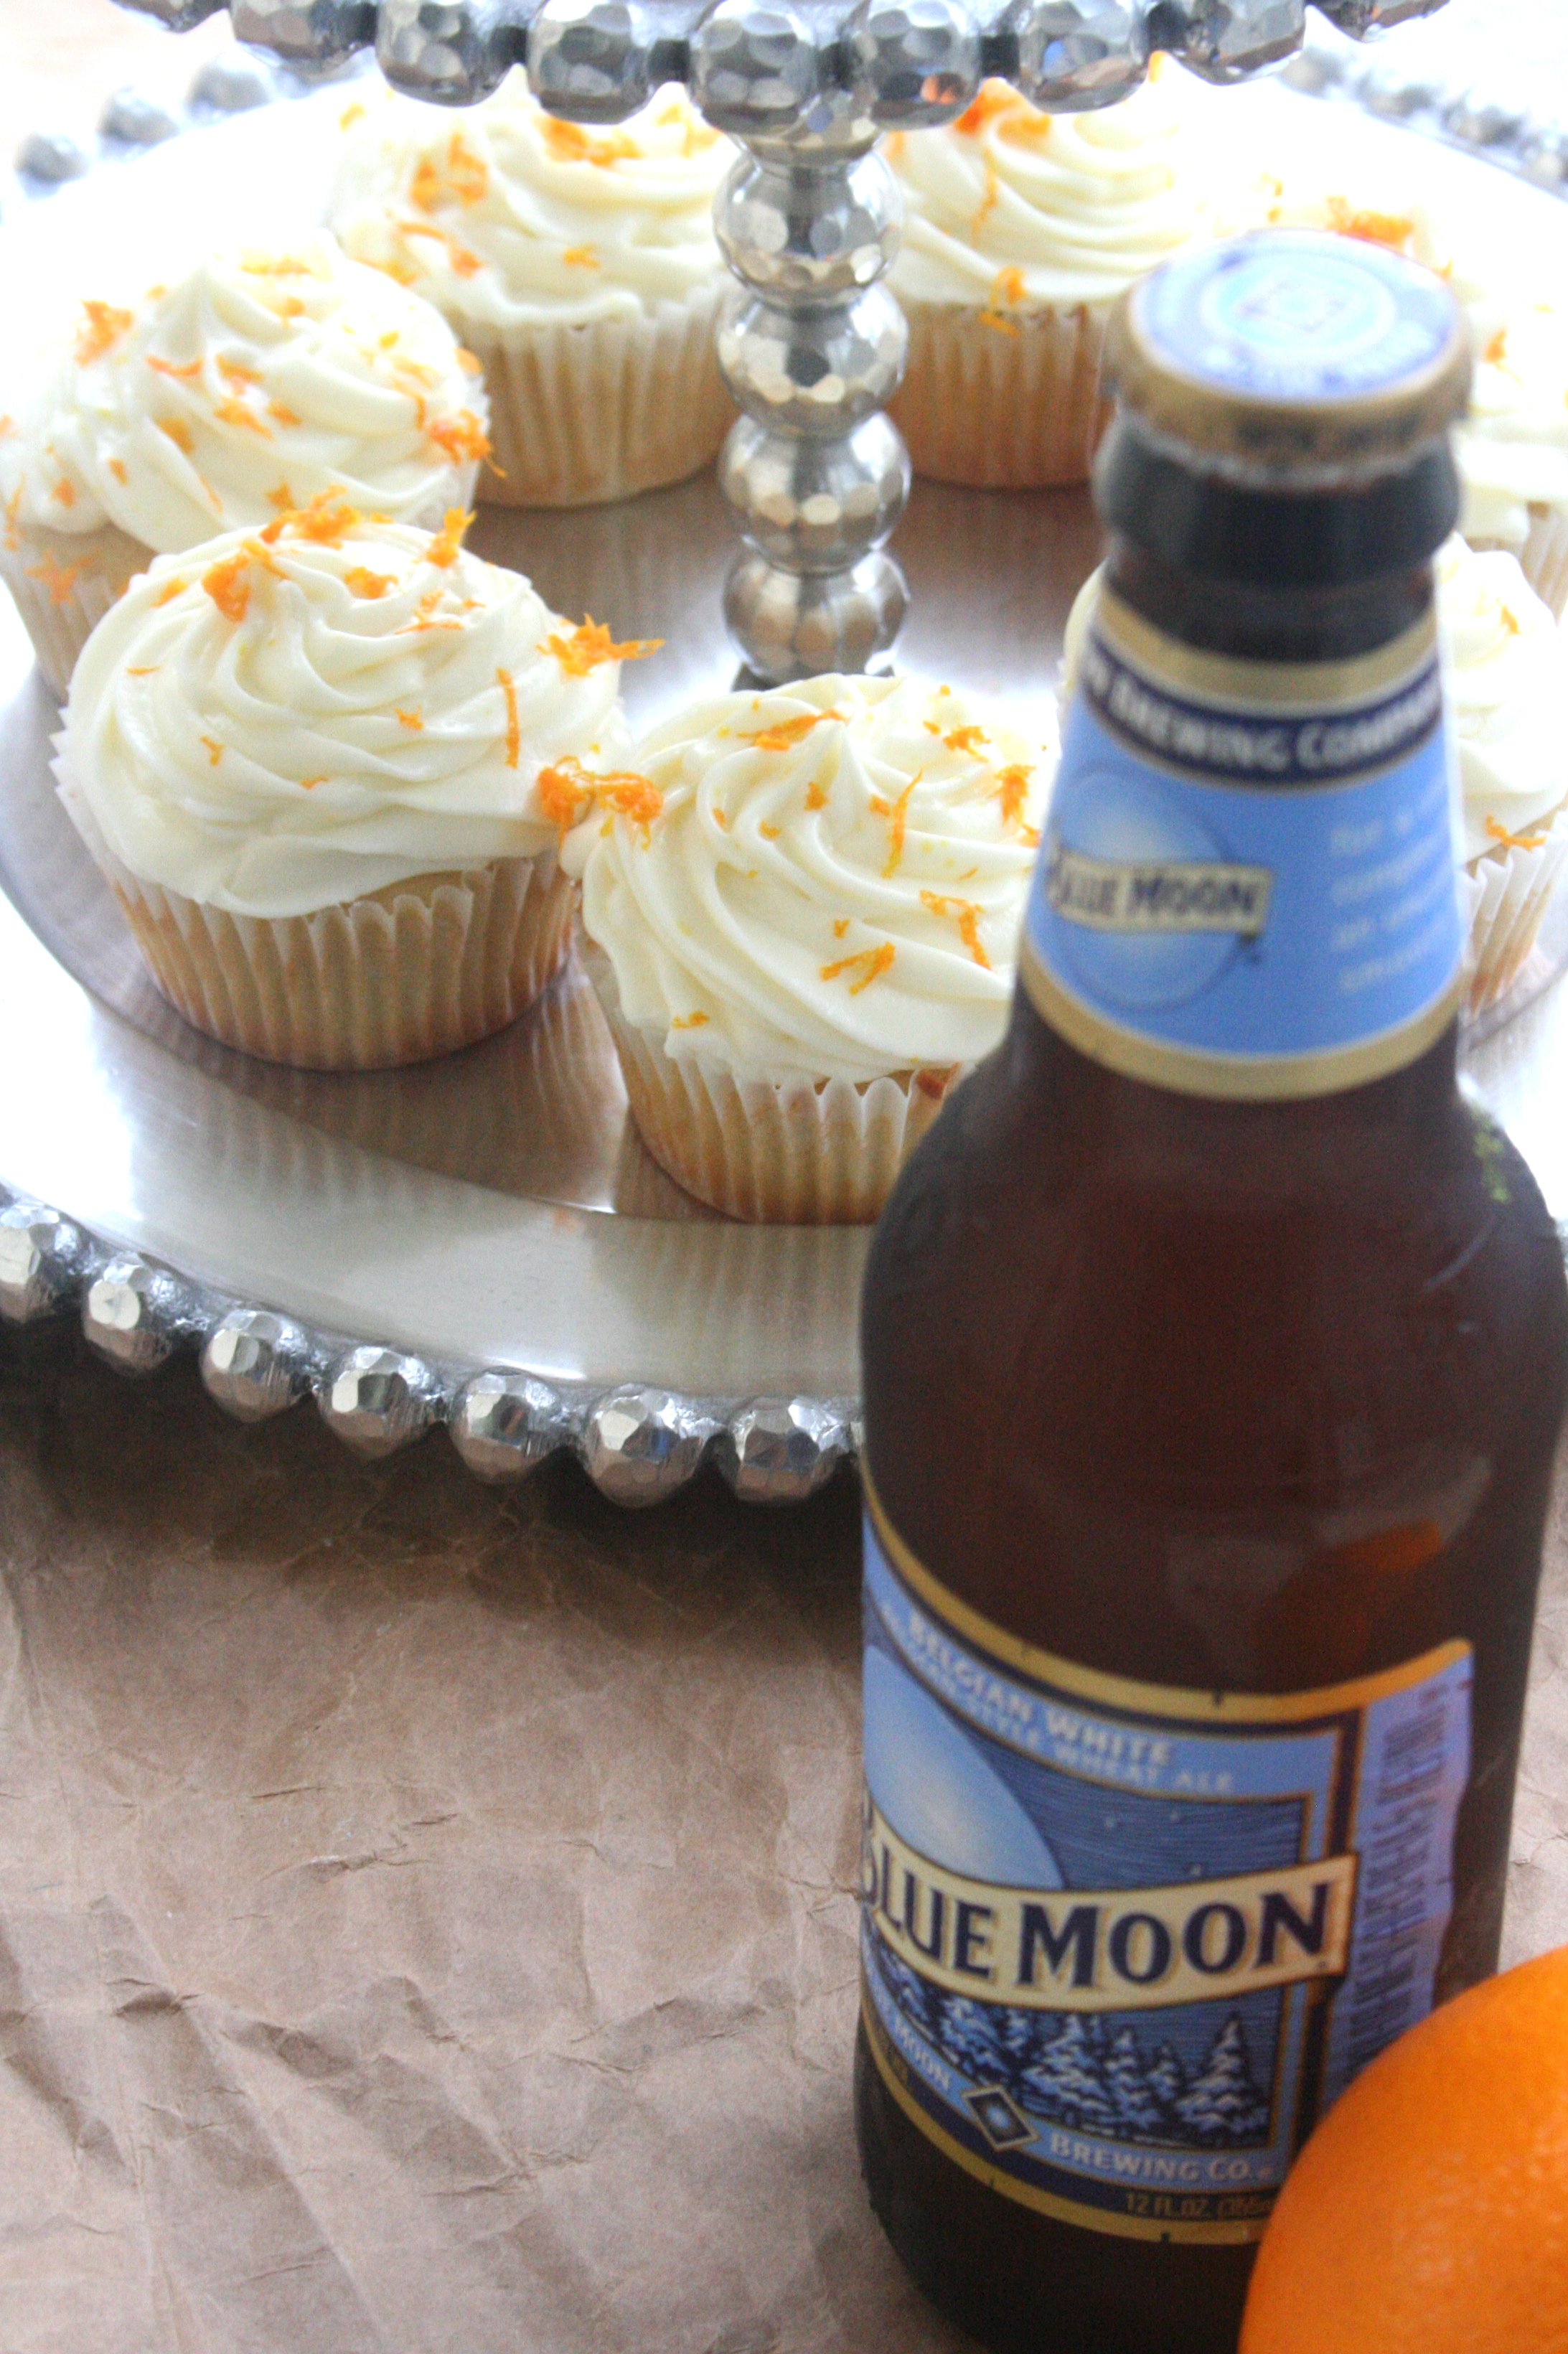 Blue Moon with Orange Frosting Cupcakes